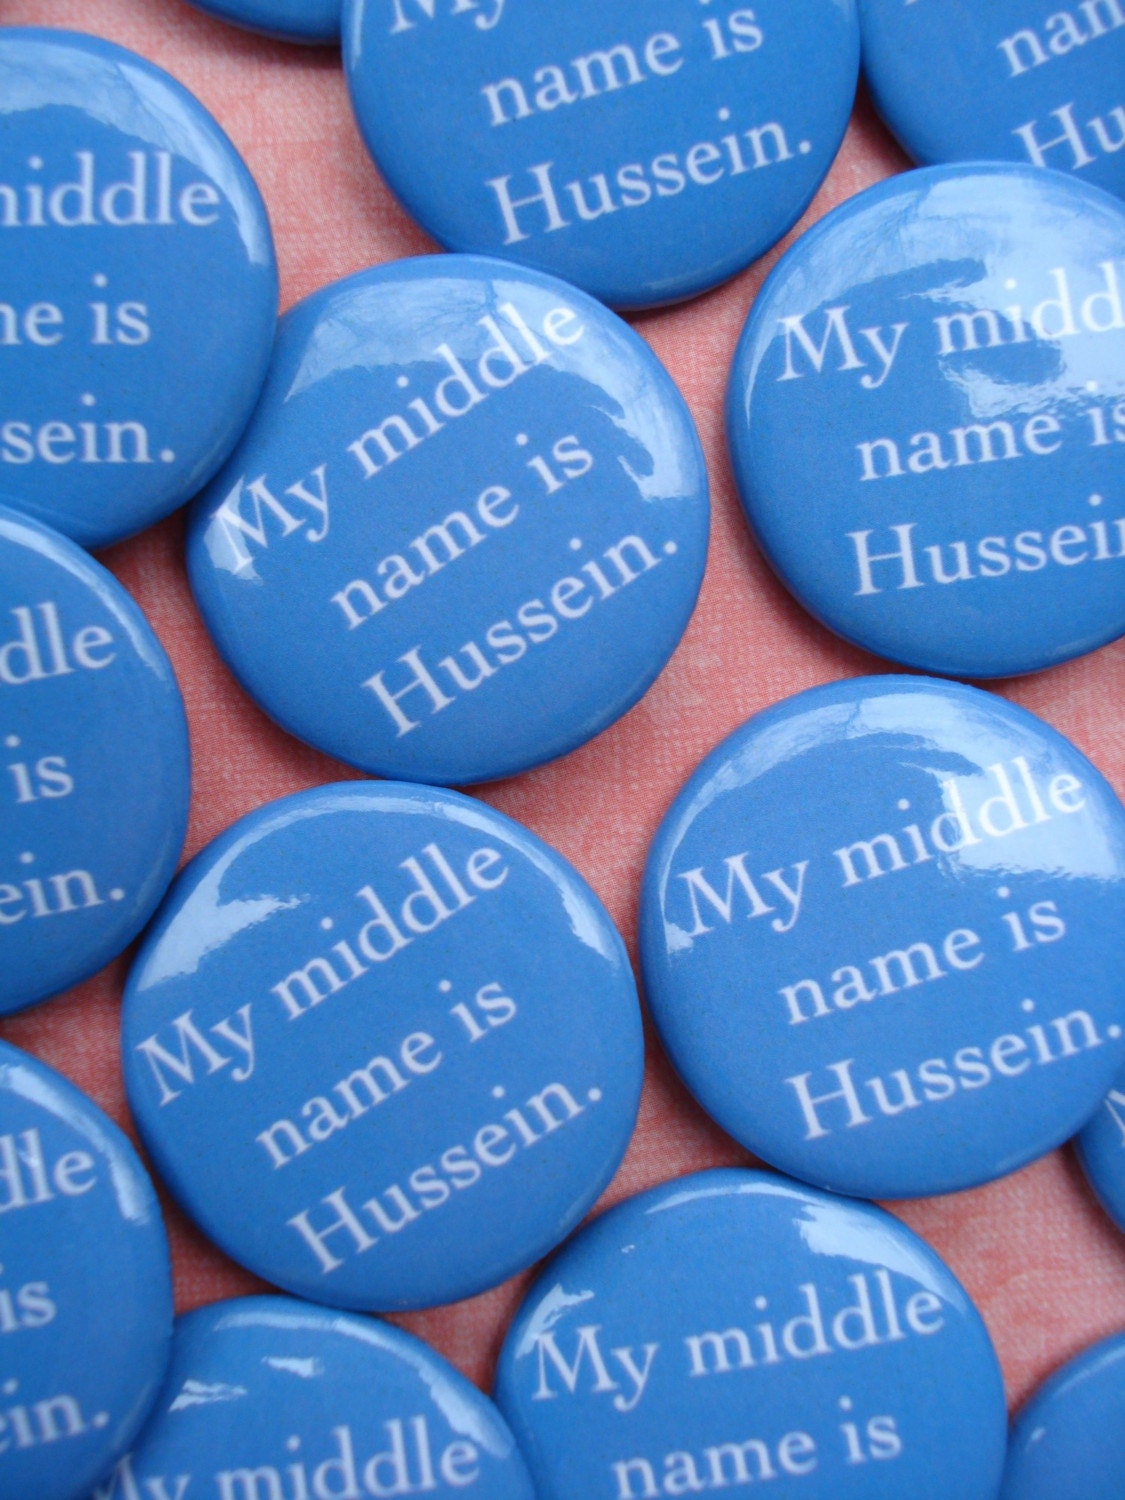 MY MIDDLE NAME IS HUSSEIN. 1.25in Barack Obama button 